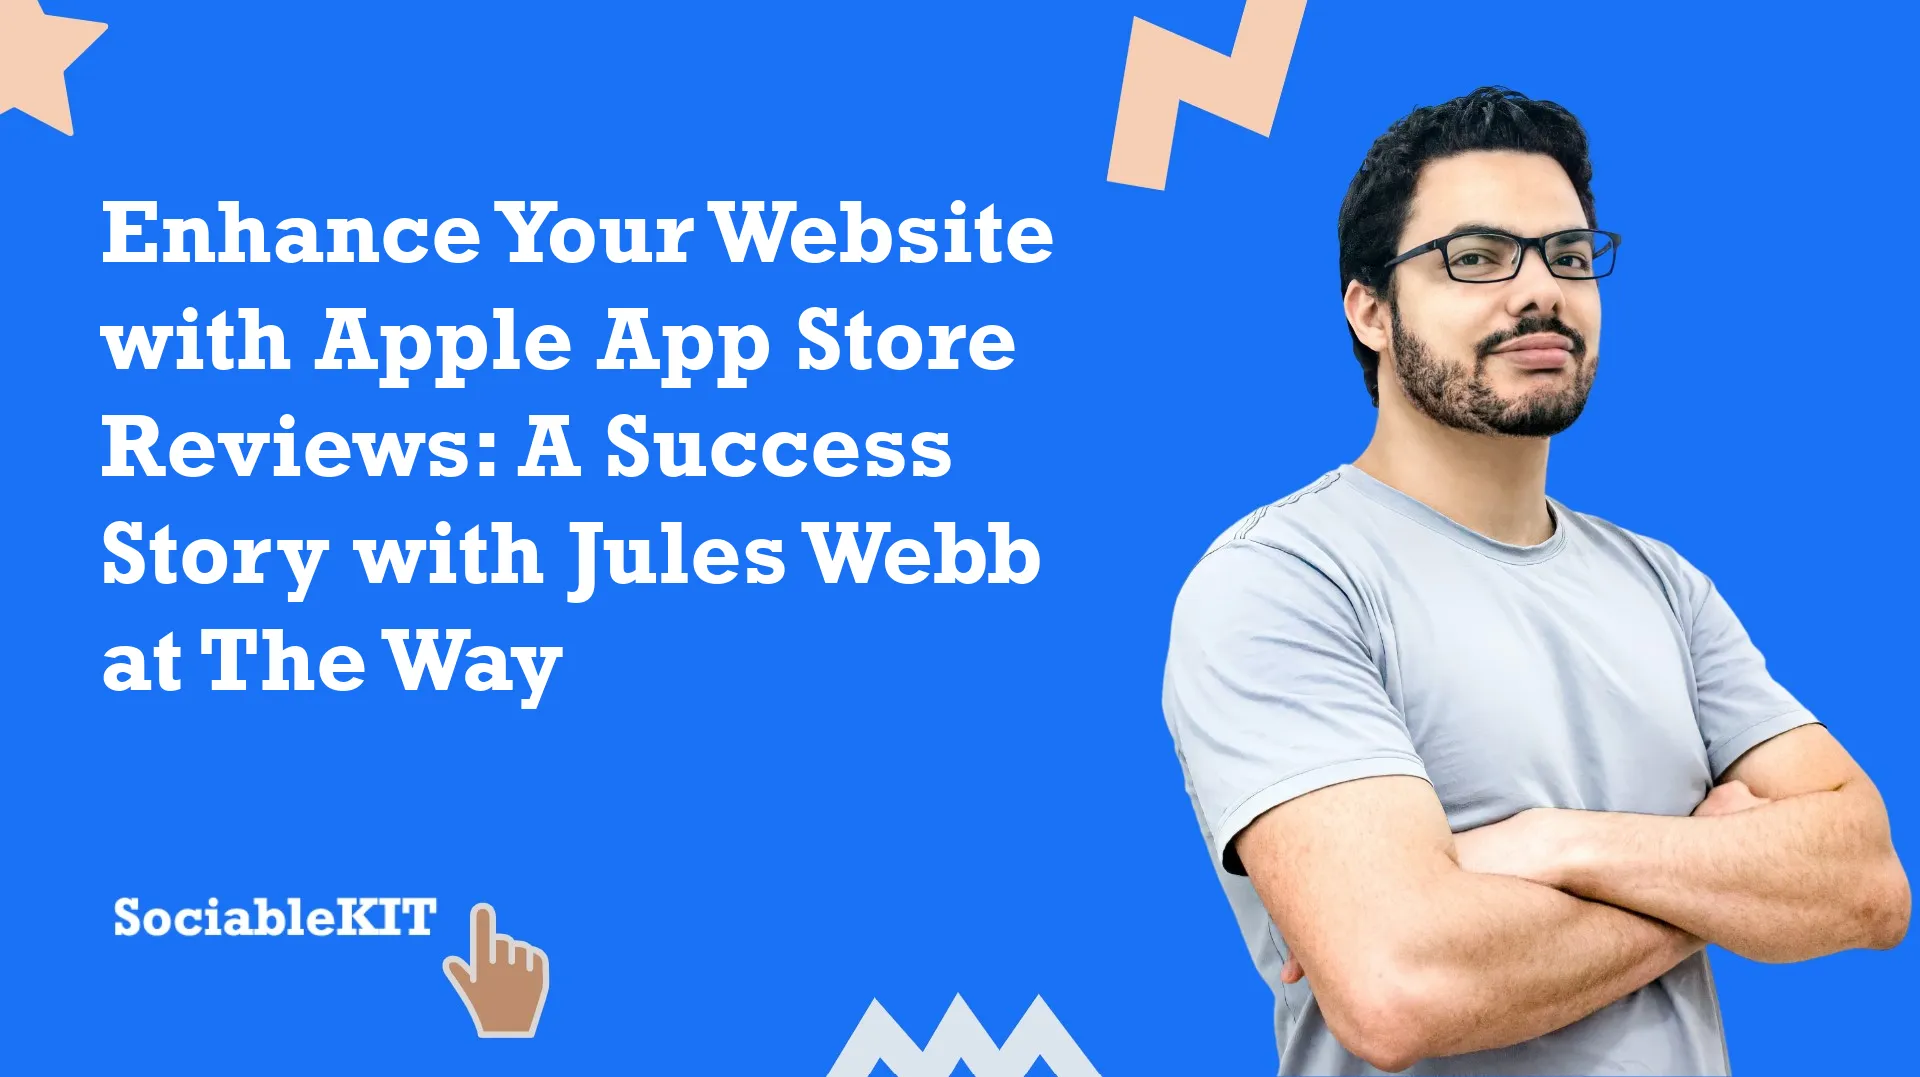 Enhance Your Website with Apple App Store Reviews: A Success Story with Jules Webb at The Way